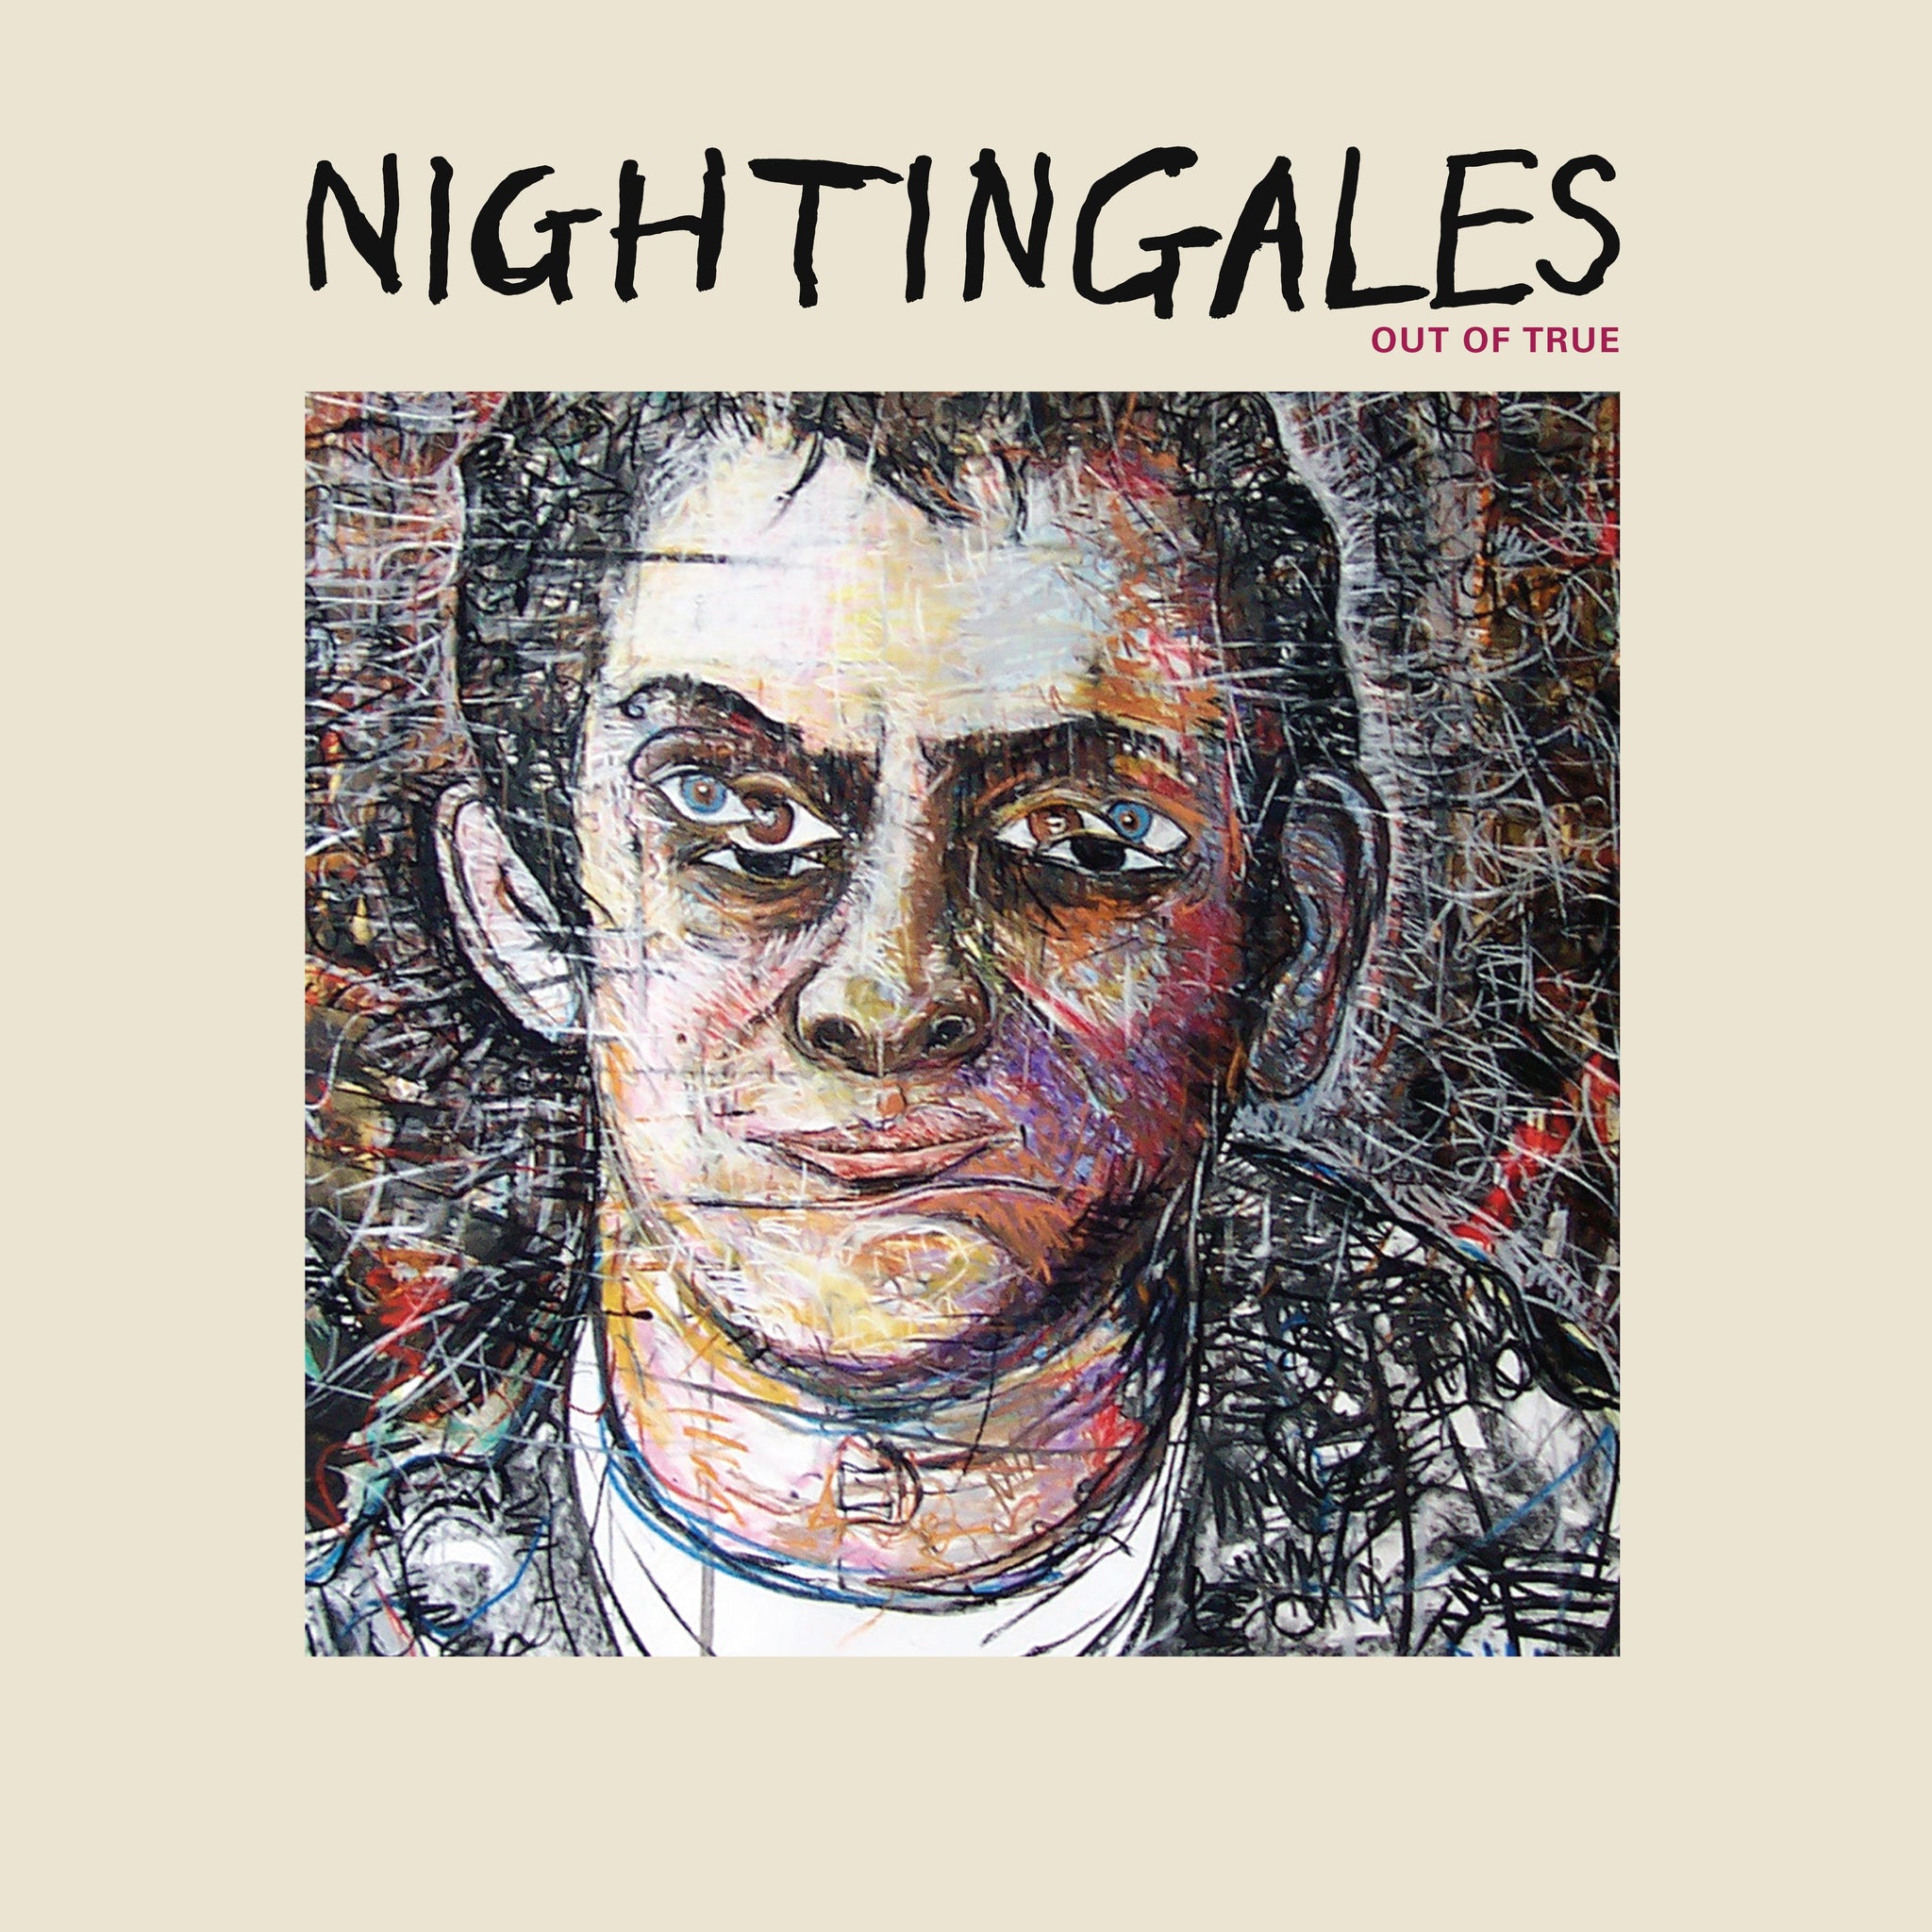 THE NIGHTINGALES - Out of True - 2LP - Vinyl [RSD23]